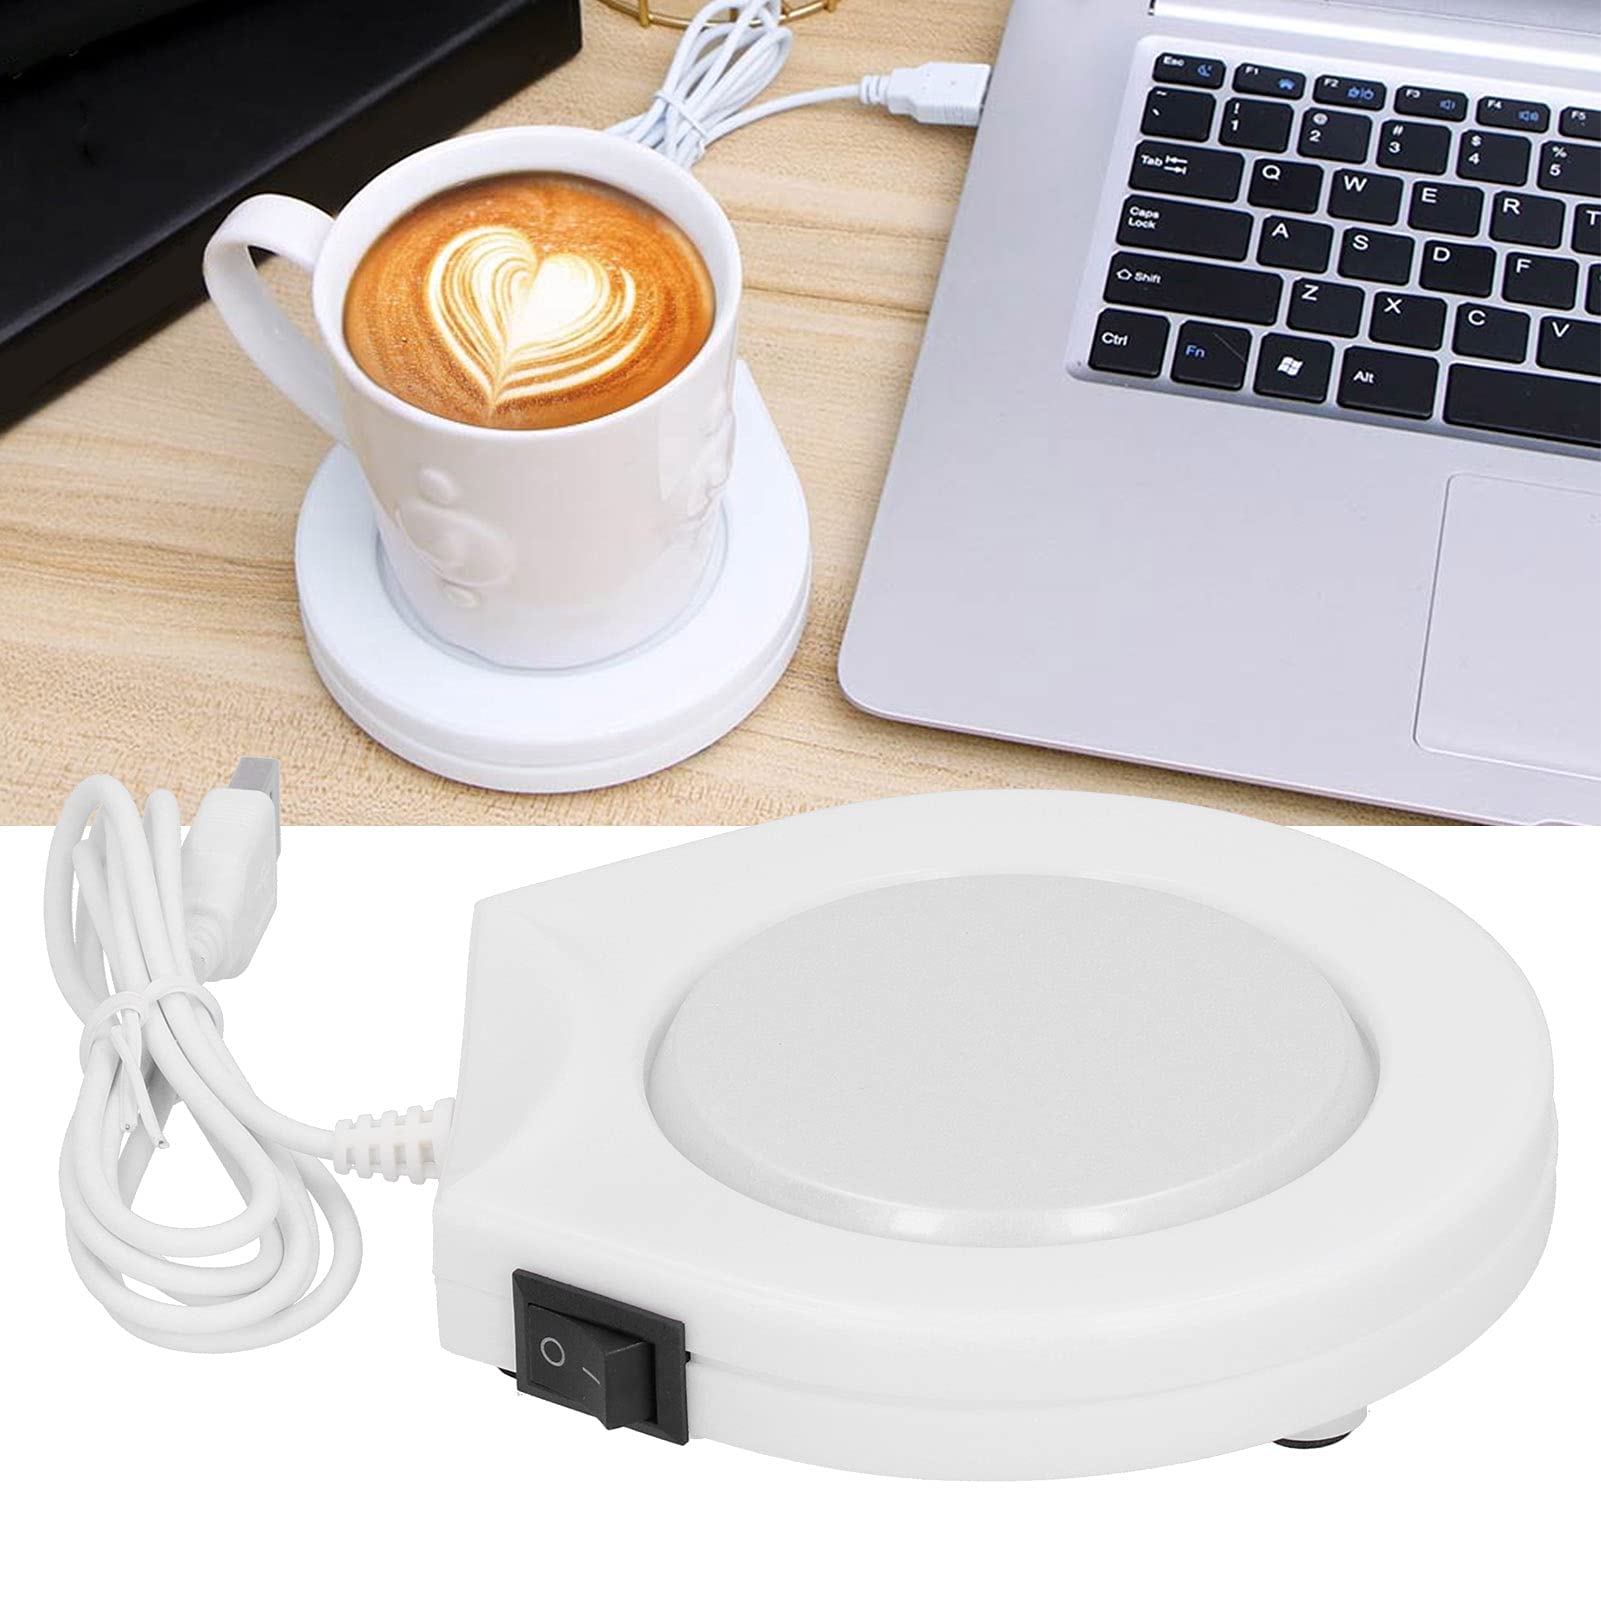 Warmer Mug Mat, Convenient Use Coffee Cup Warmer 4.5x4.5x0.8in Practical USB Plug-in Coffee Warmer for Coffee Tea, Milk, Hot Chocolate for Homes Offices Companies